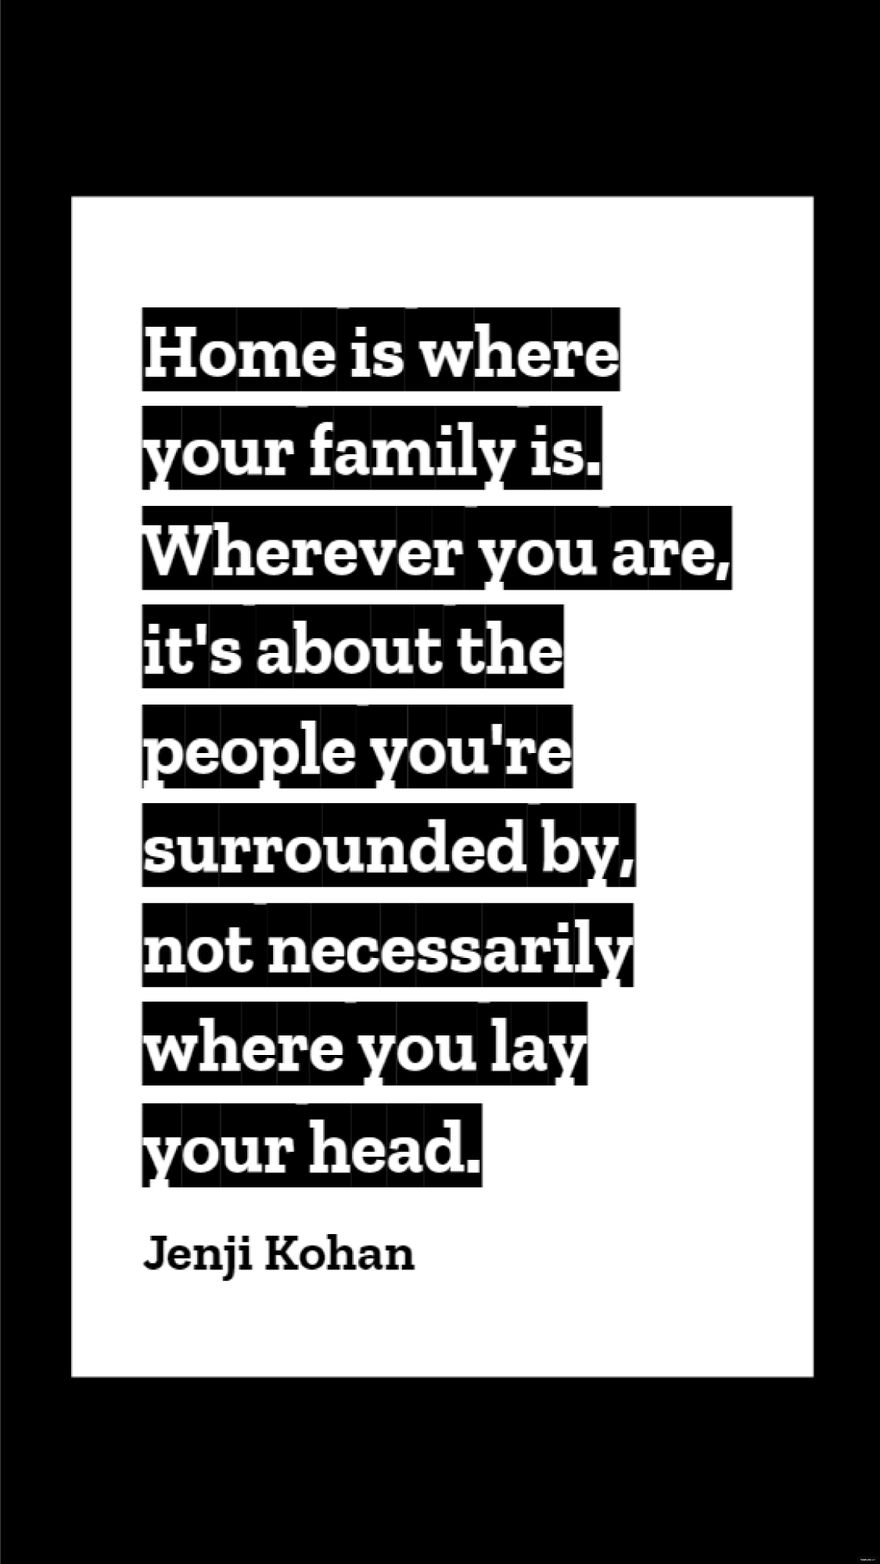 Jenji Kohan - Home is where your family is. Wherever you are, it's about the people you're surrounded by, not necessarily where you lay your head.